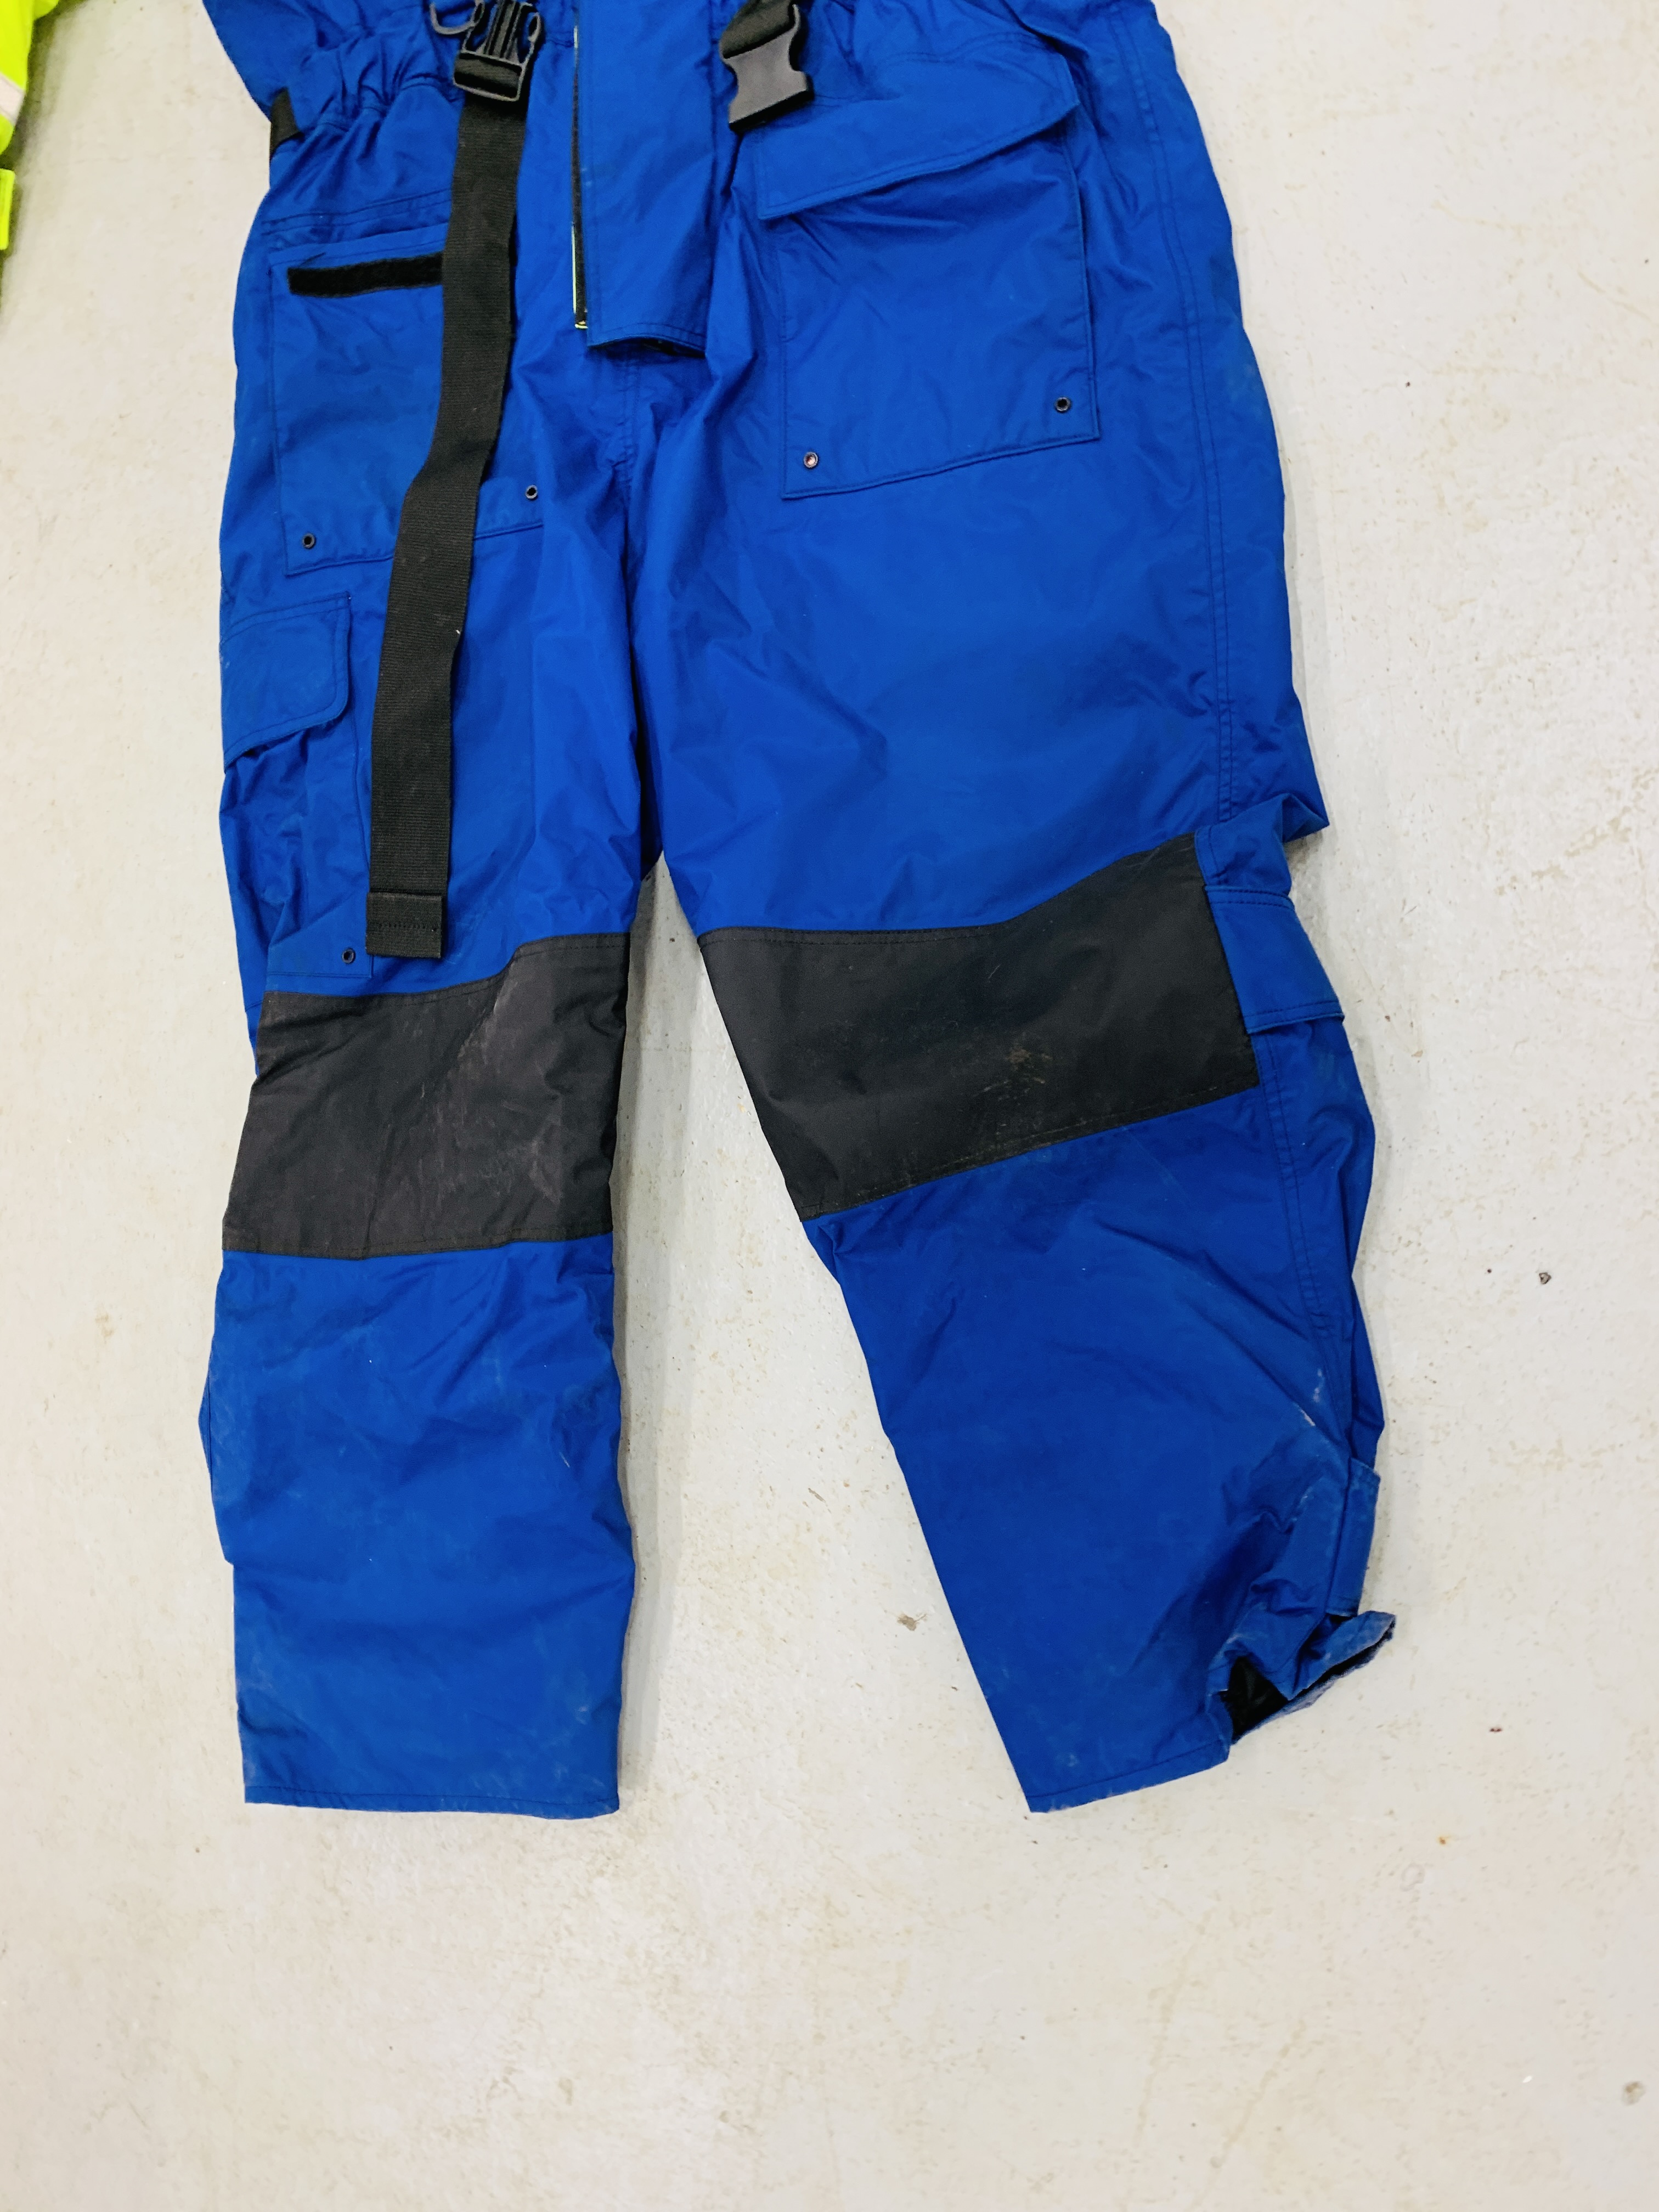 A FLADEN RESCUE SYSTEM FULL BODY SUIT SIZE XXL (YELLOW AND BLUE) - Image 4 of 5